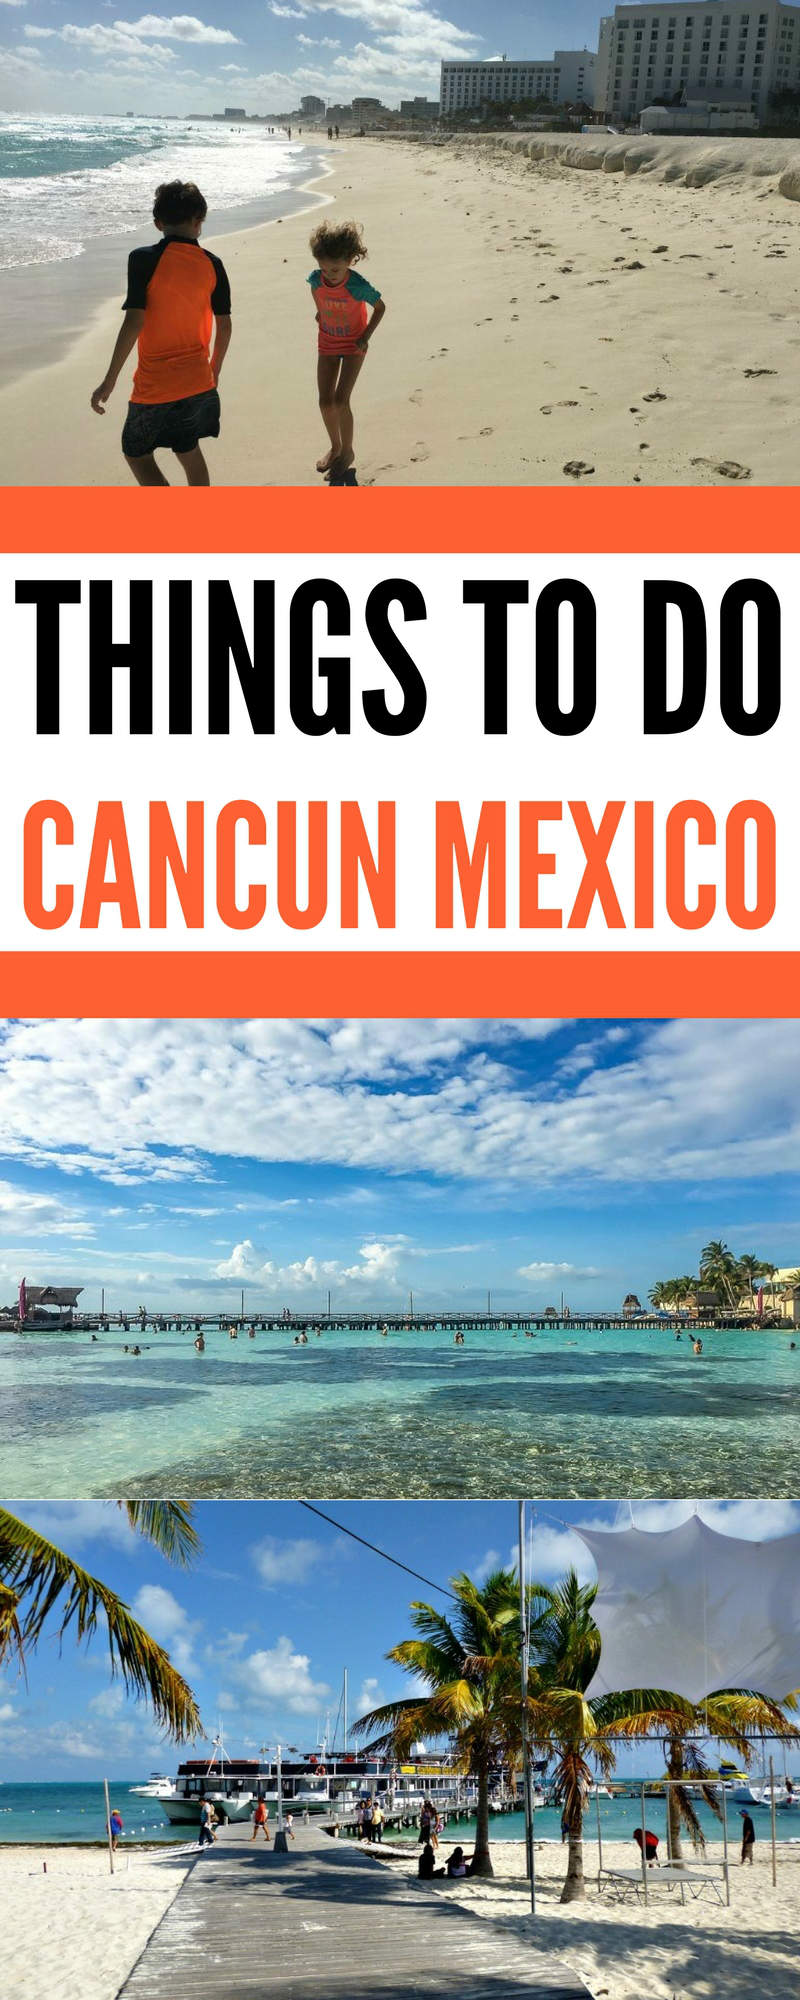 Things to do in Cancun Mexico. With years of time spent in Cancun and around the Riviera Maya, we share our favorite activities, excursions, and more around Cancun, Mexico. Cancun Mexcio Tips | Cancun Day Trips | What do do in Cancun | Cancun beaches |Things to do in Cancun as a couple | #Cancun #Mexico #travel #traveltips #exploremore